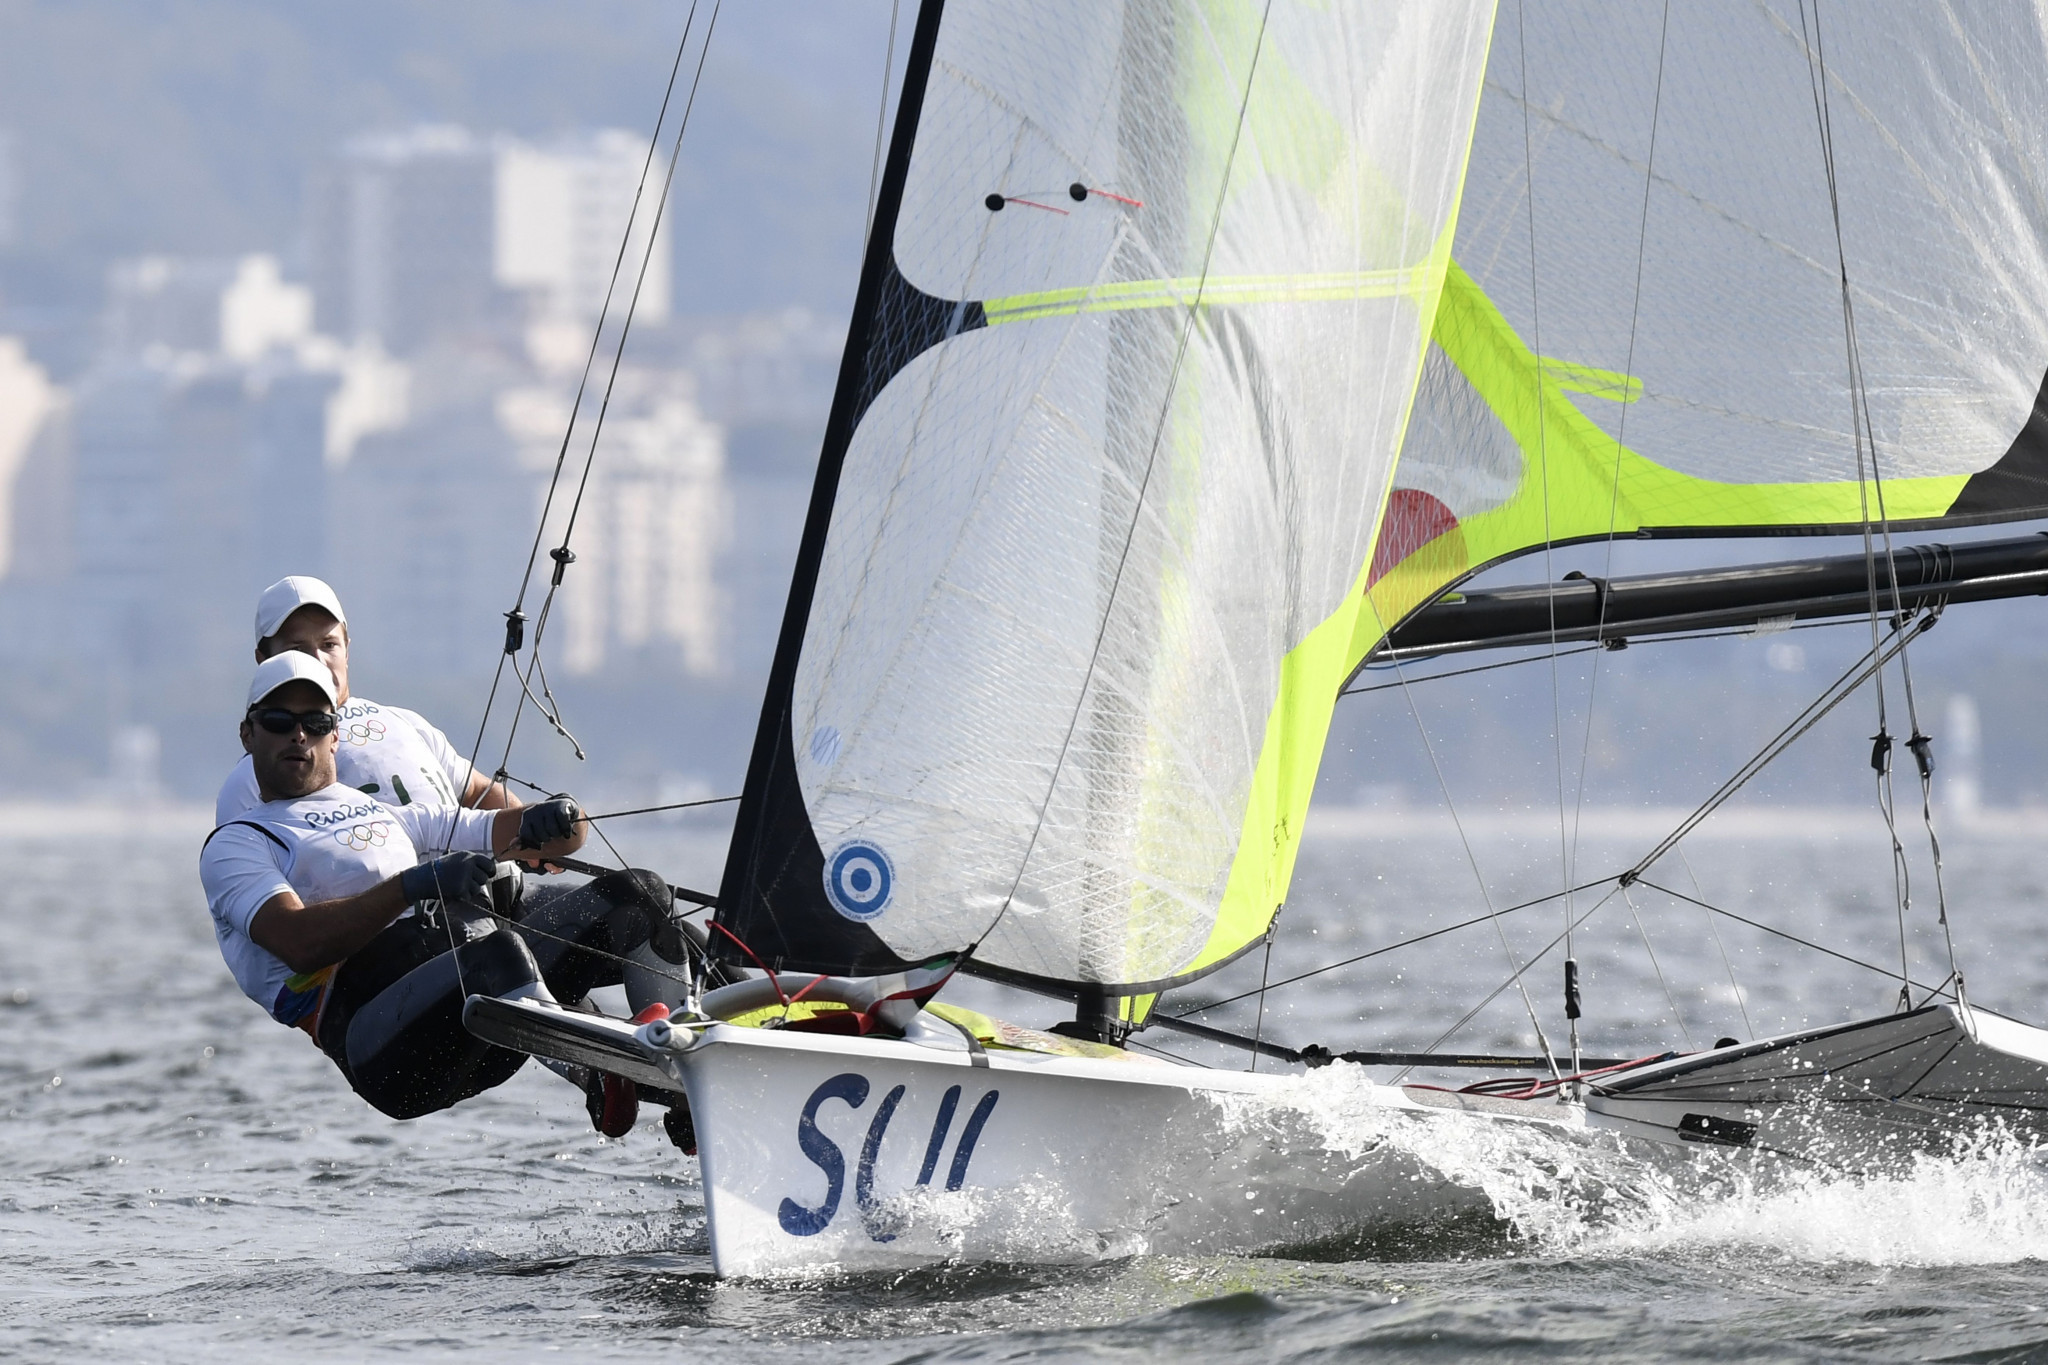 Sailors and windsurfer named to Swiss team for Tokyo 2020